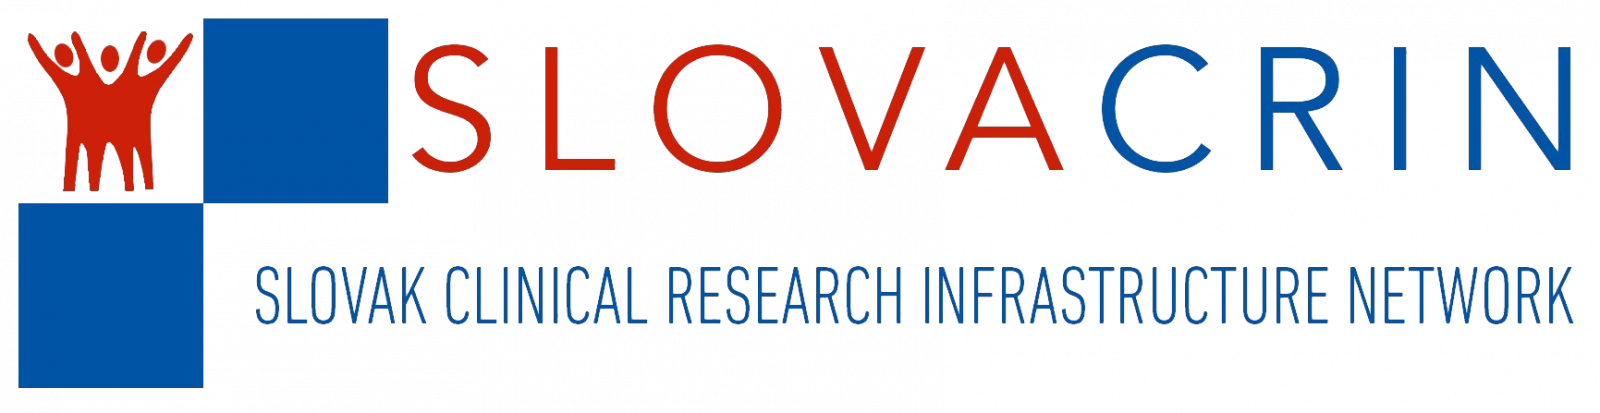 Slovak Clinical Research Infrastructure Network